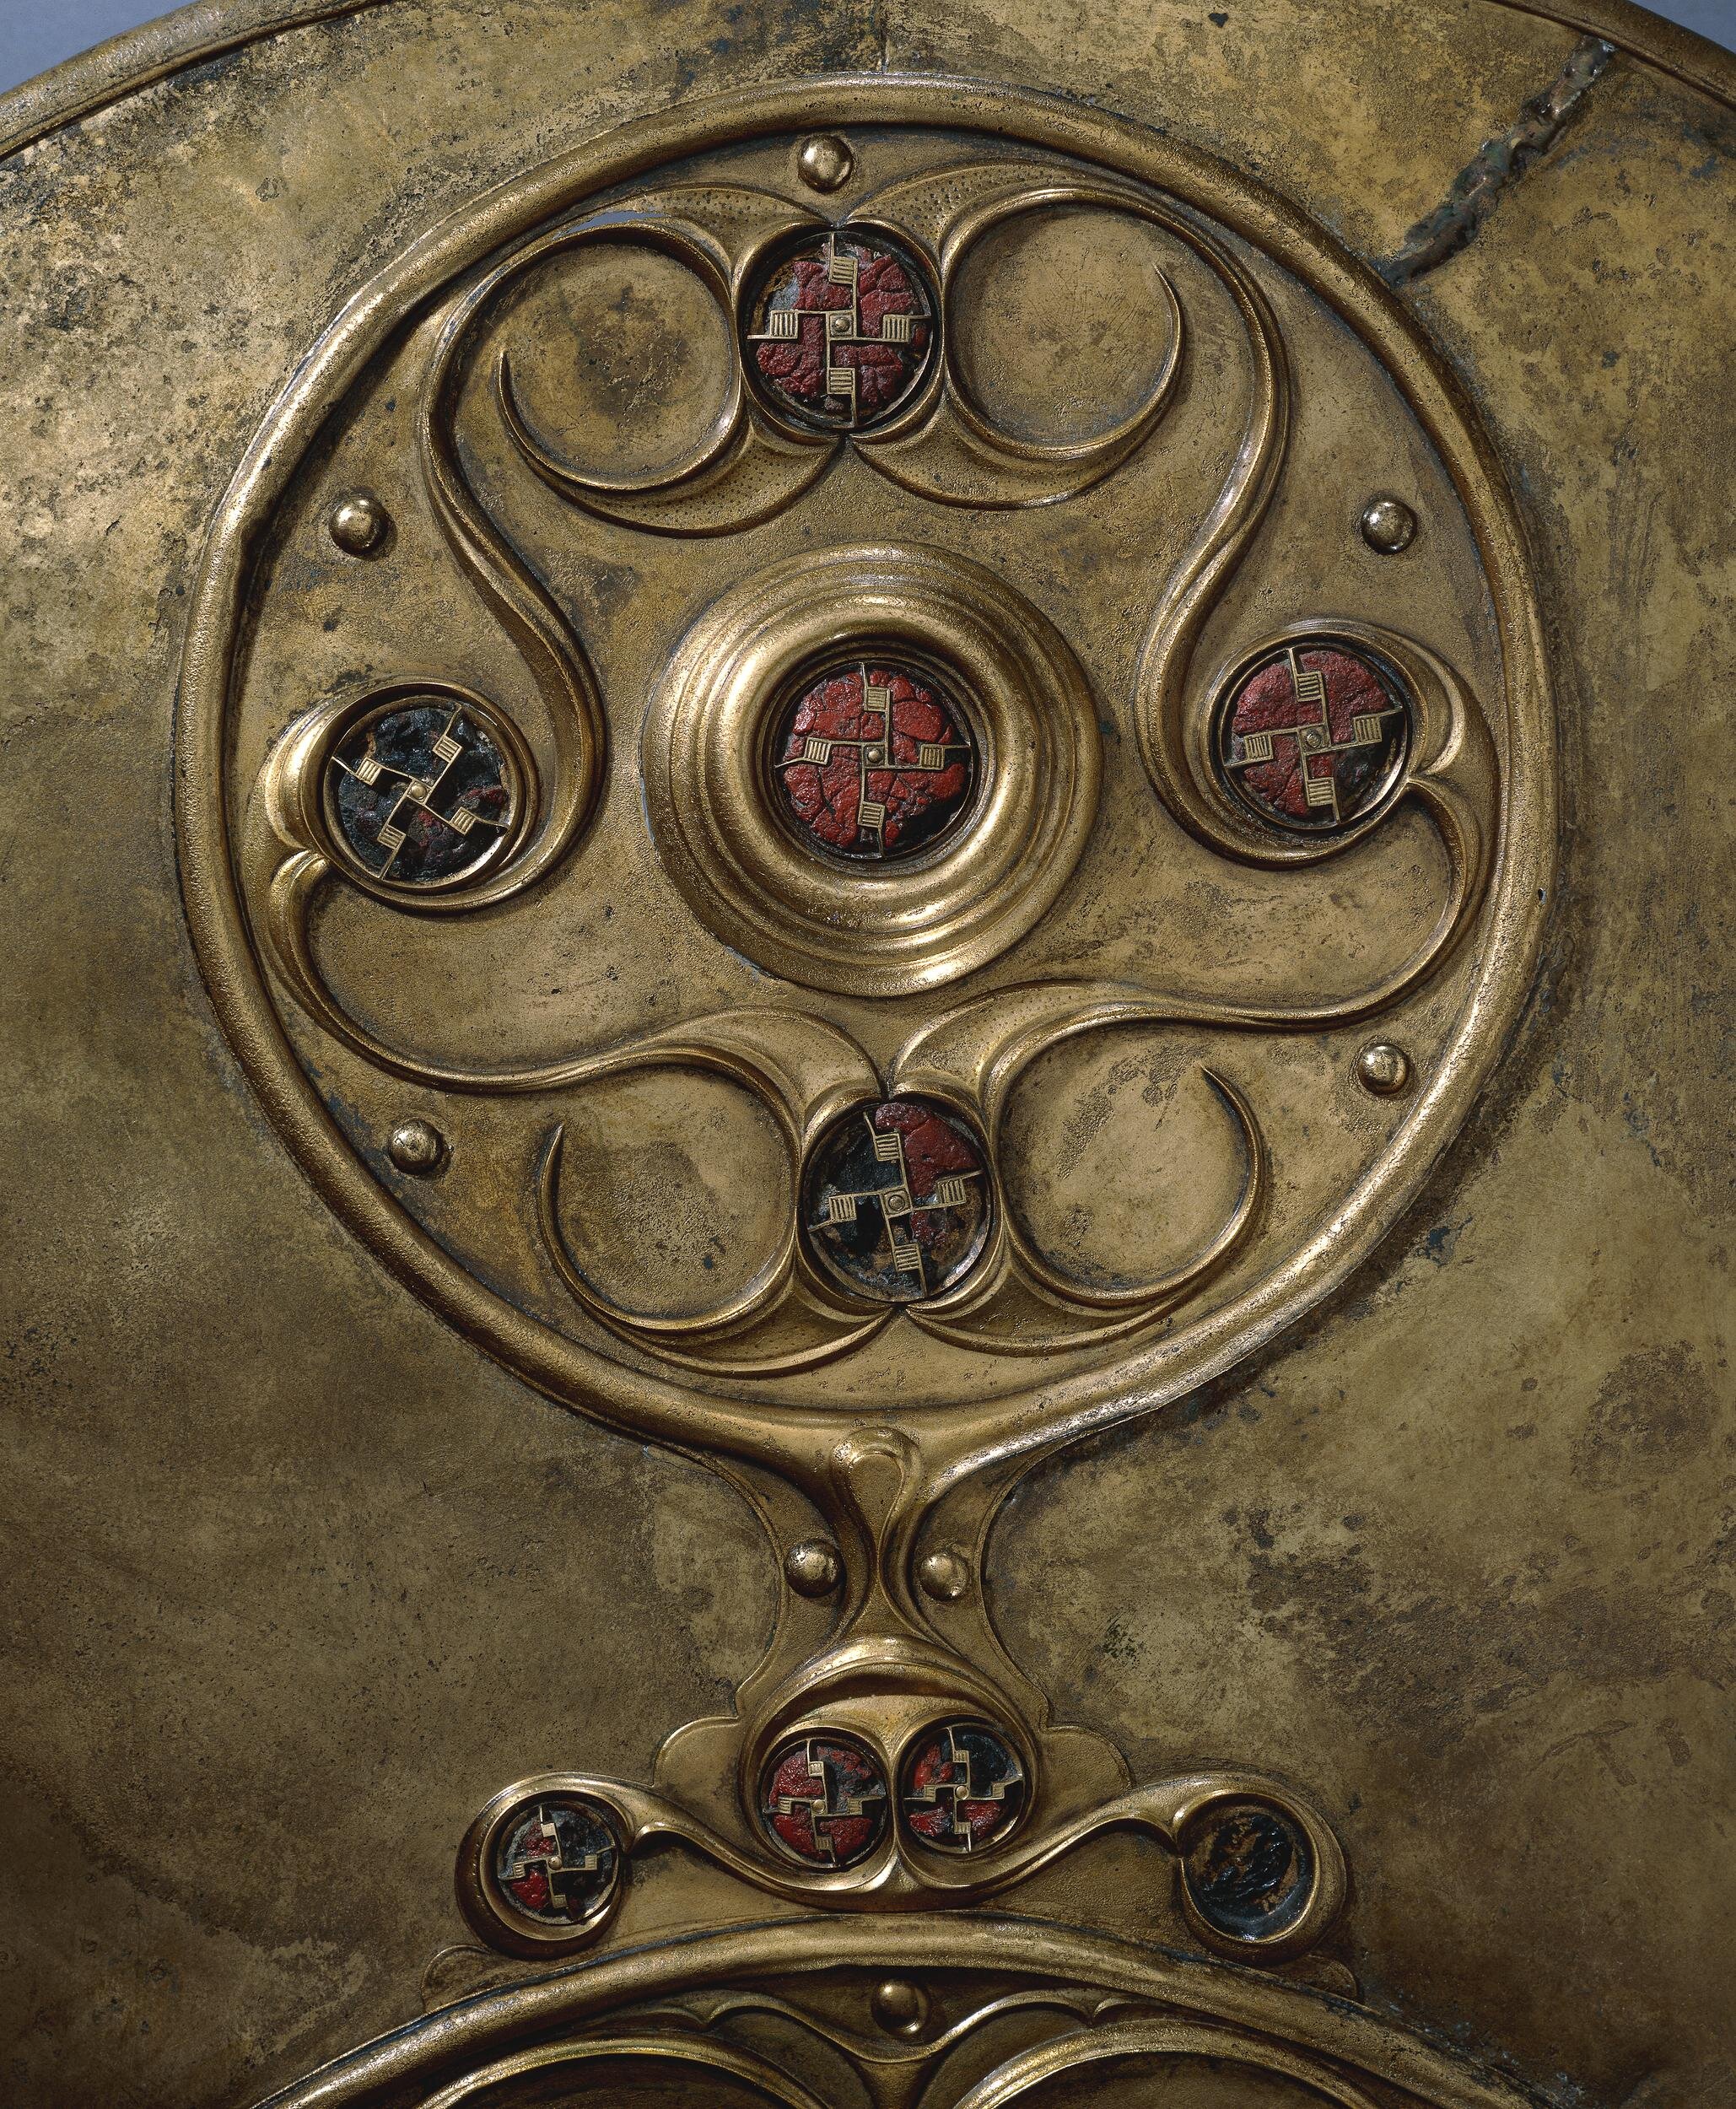 A detail of the Battersea Shield